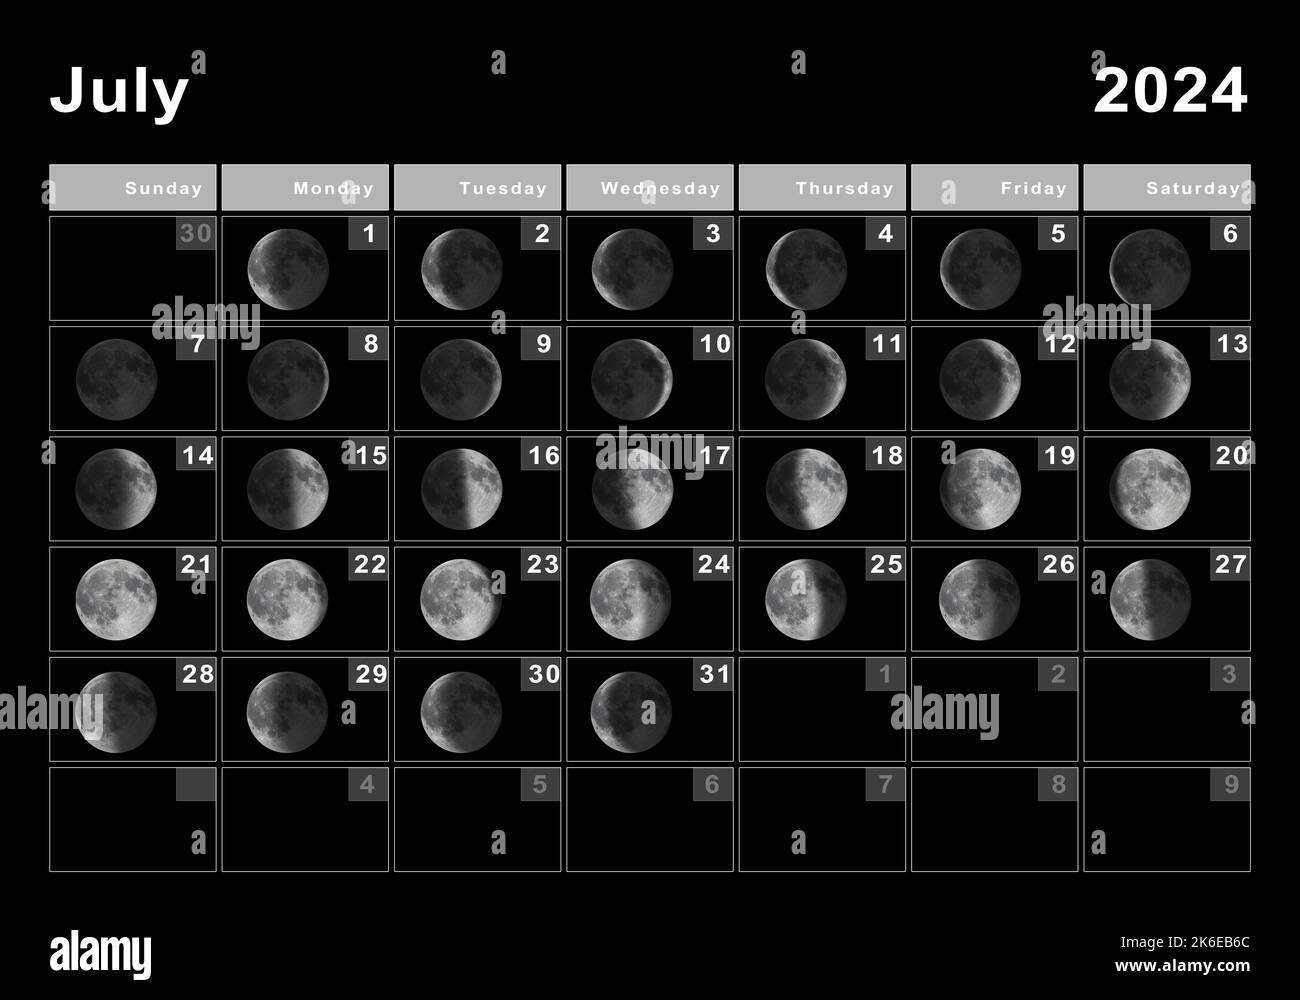 July 2024 Lunar Calendar, Moon Cycles, Moon Phases Stock Photo - Alamy regarding July 2024 Calendar With Moon Phases